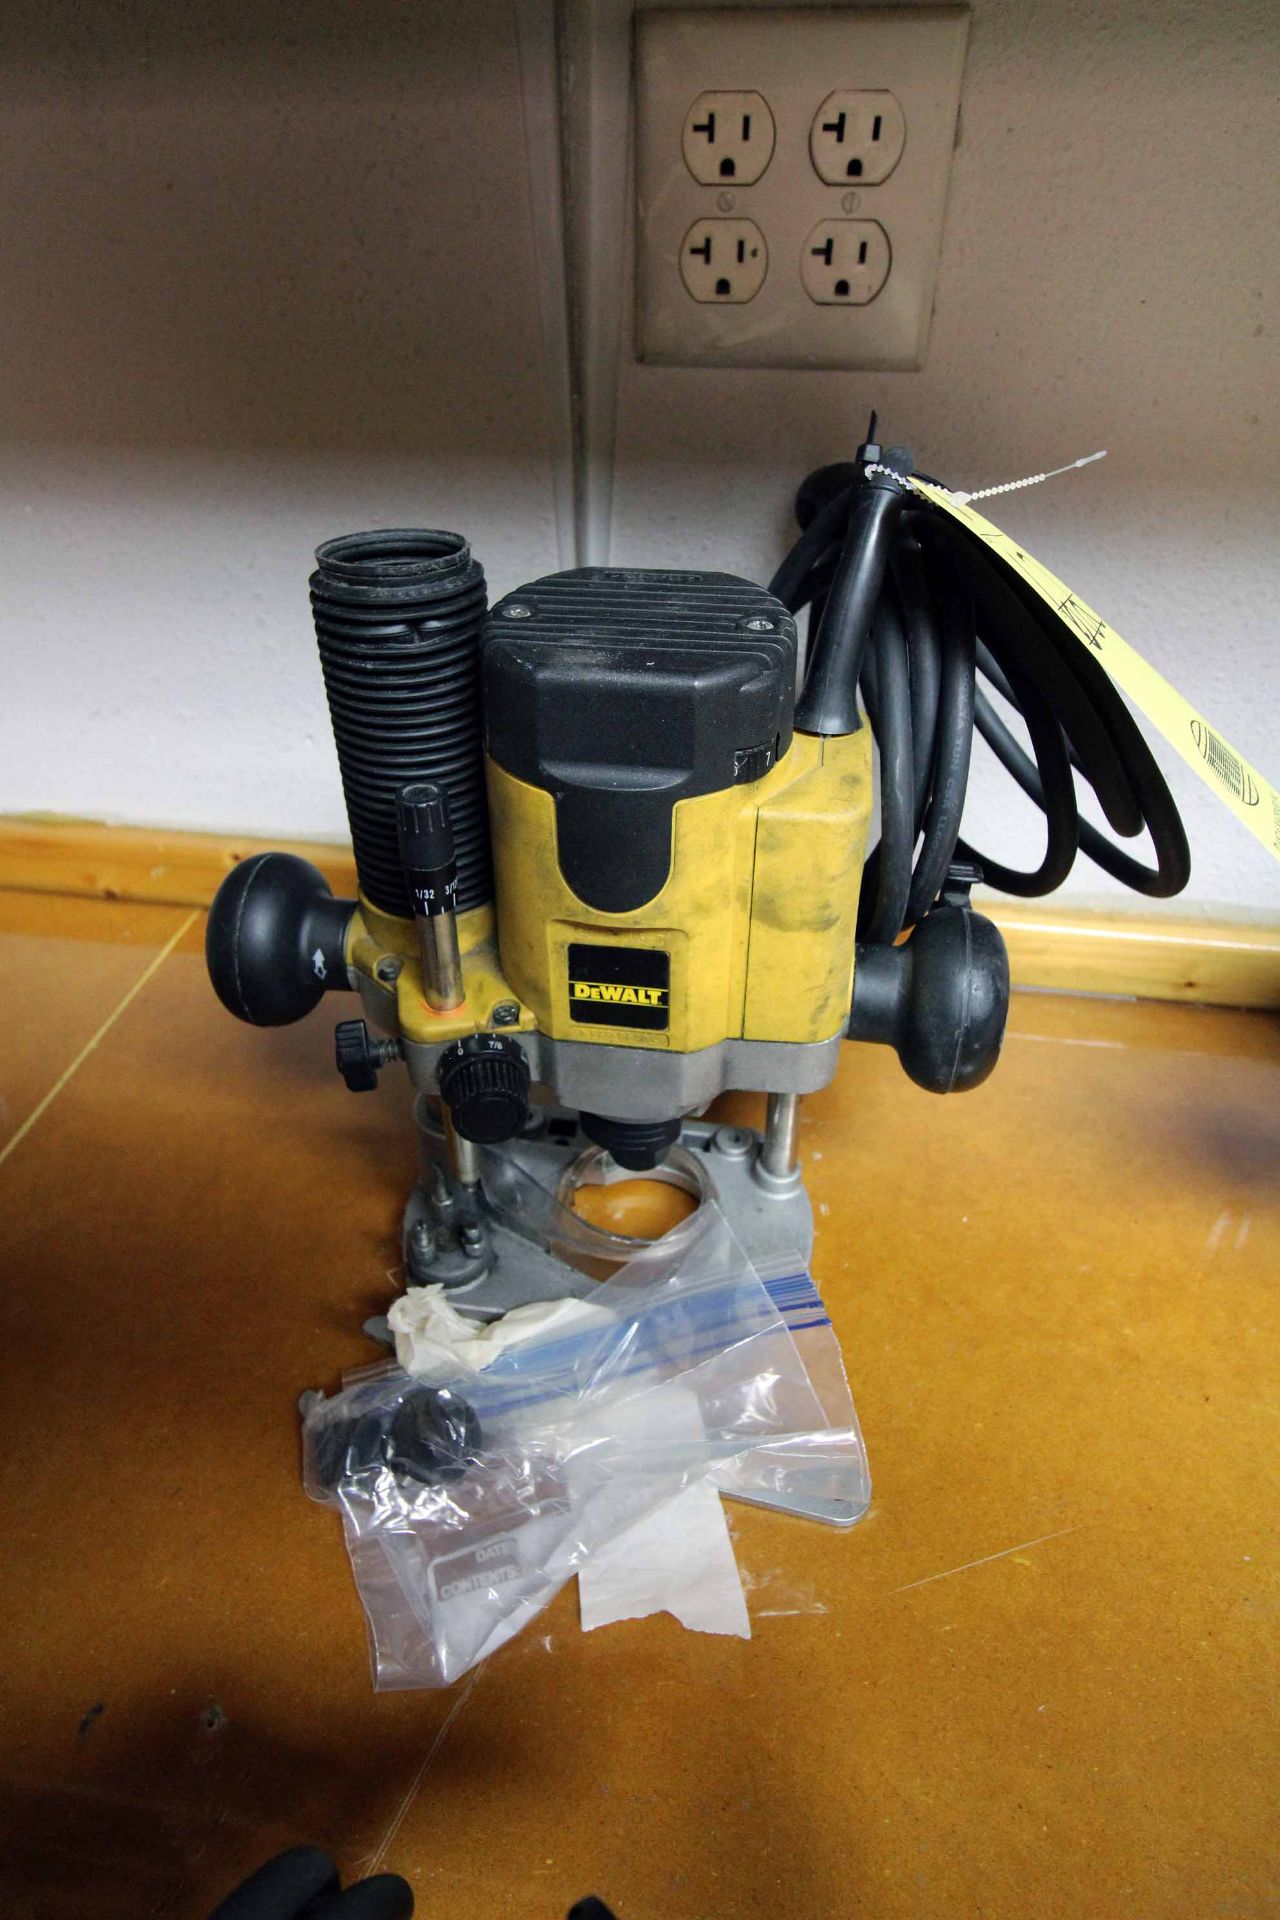 EVS PLUNGE ROUTER, DEWALT MDL. 621, 2 HP motor, spds: 8000-24,000 RPM (Located at: Offshore Clamps &